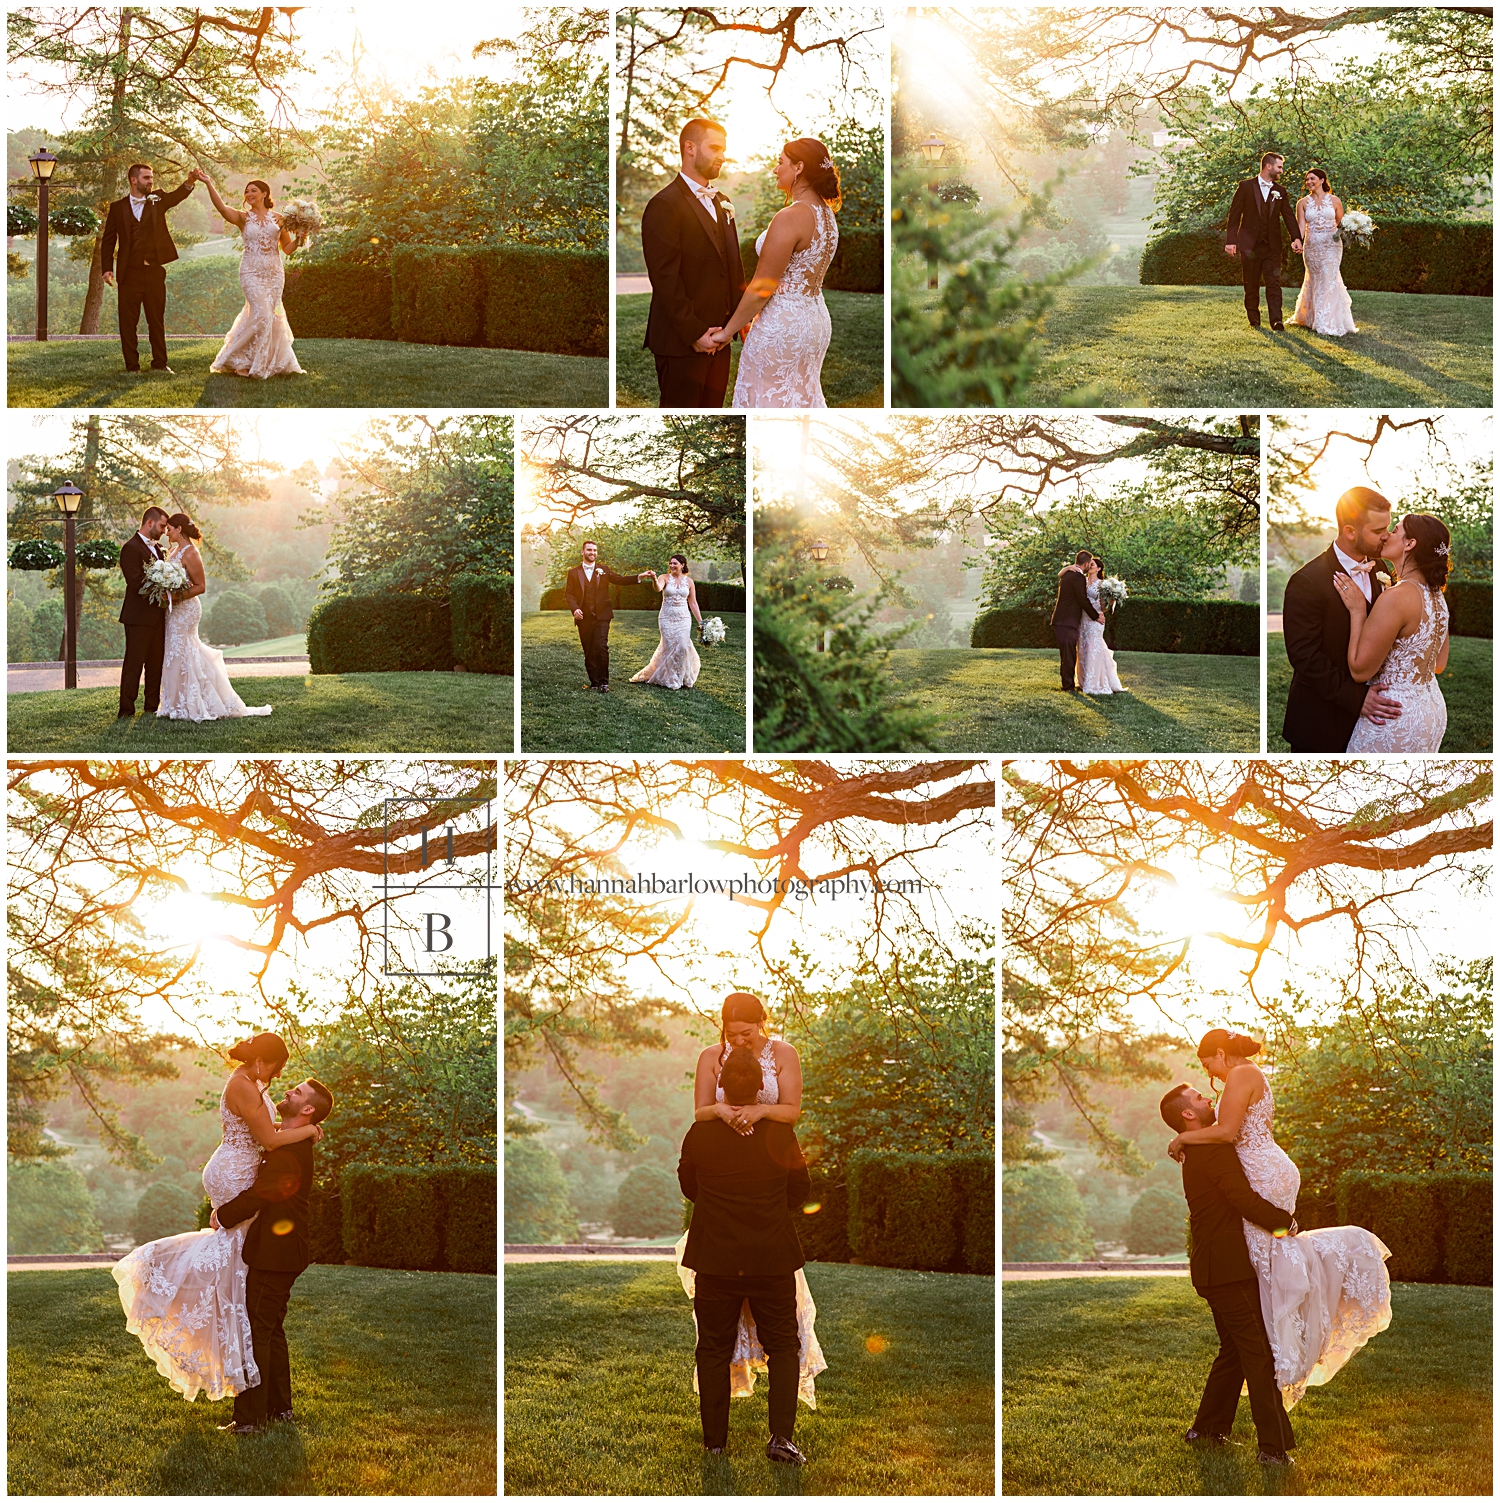 Wedding photos of couple during Golden hour under tree.